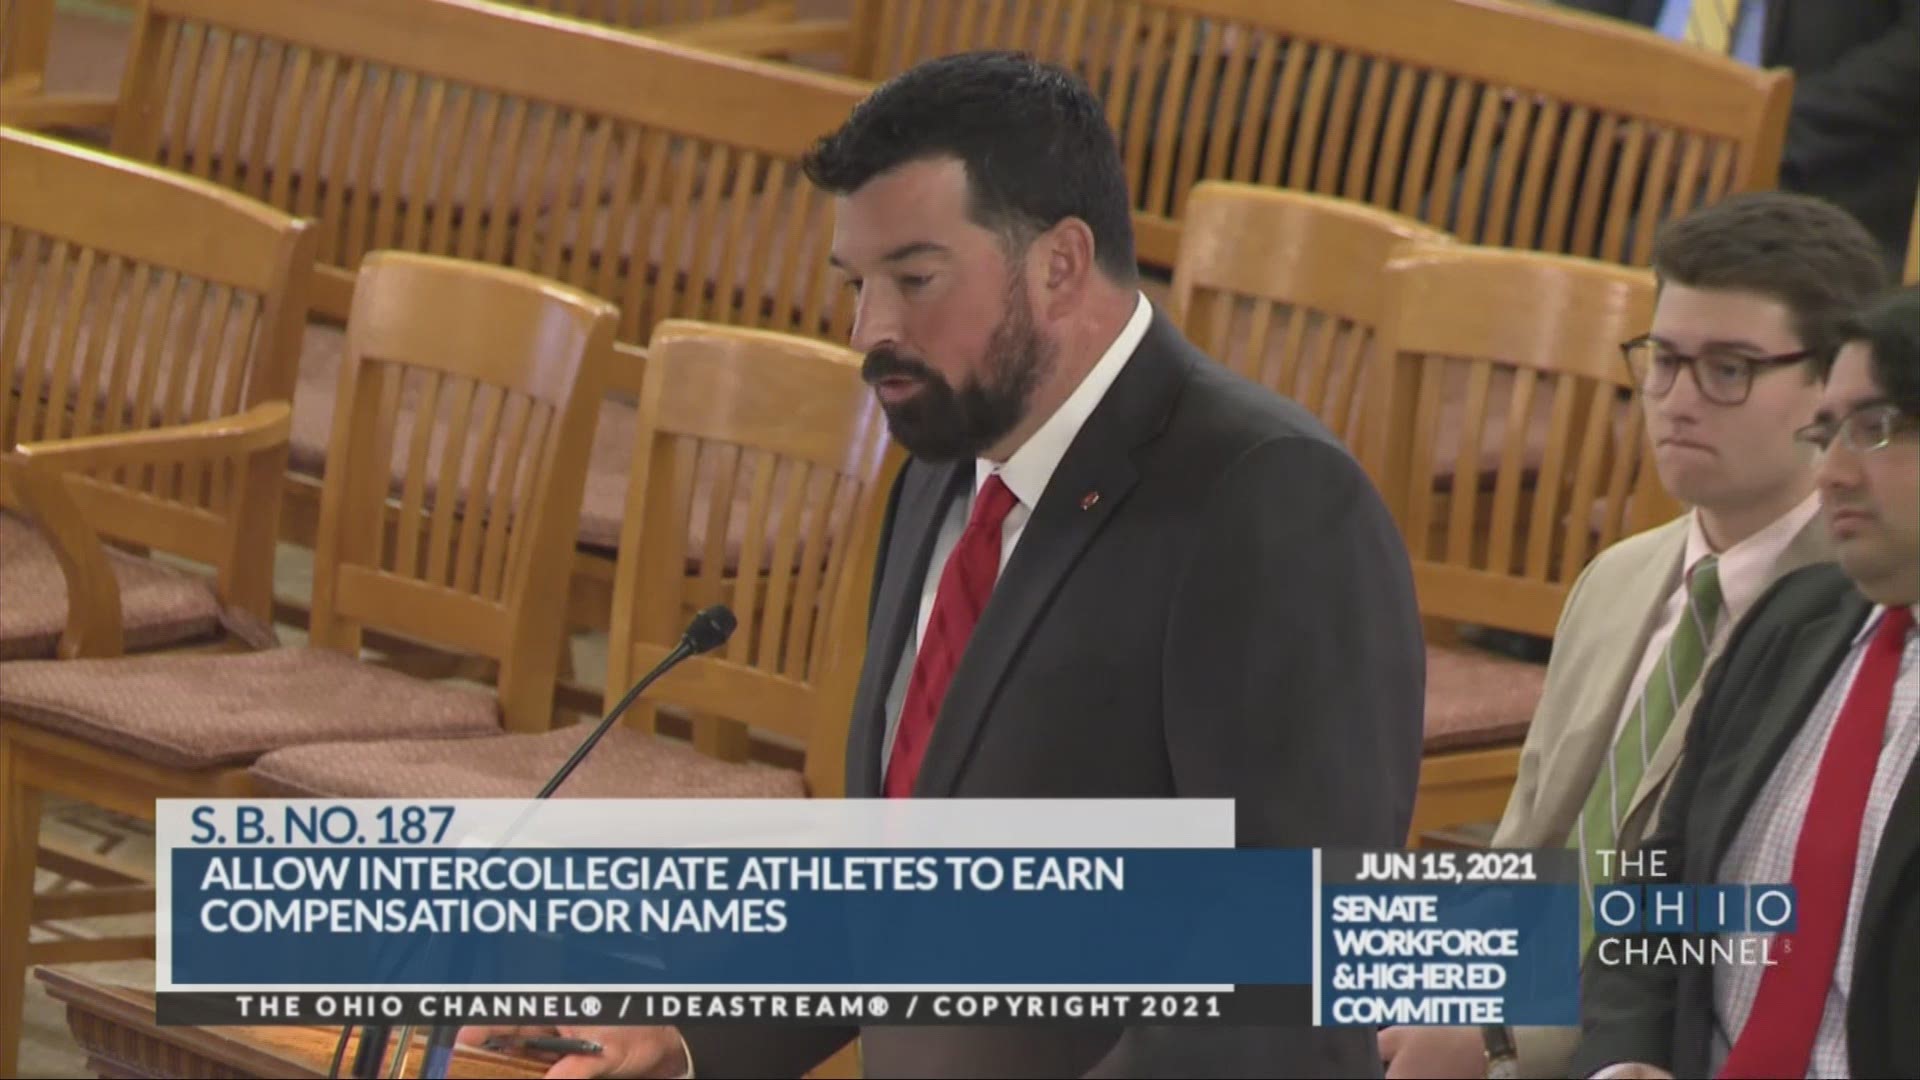 The bill, introduced by Sen. Niraj Antani, would allow student-athletes in Ohio to earn compensation from their name, image and likeness.